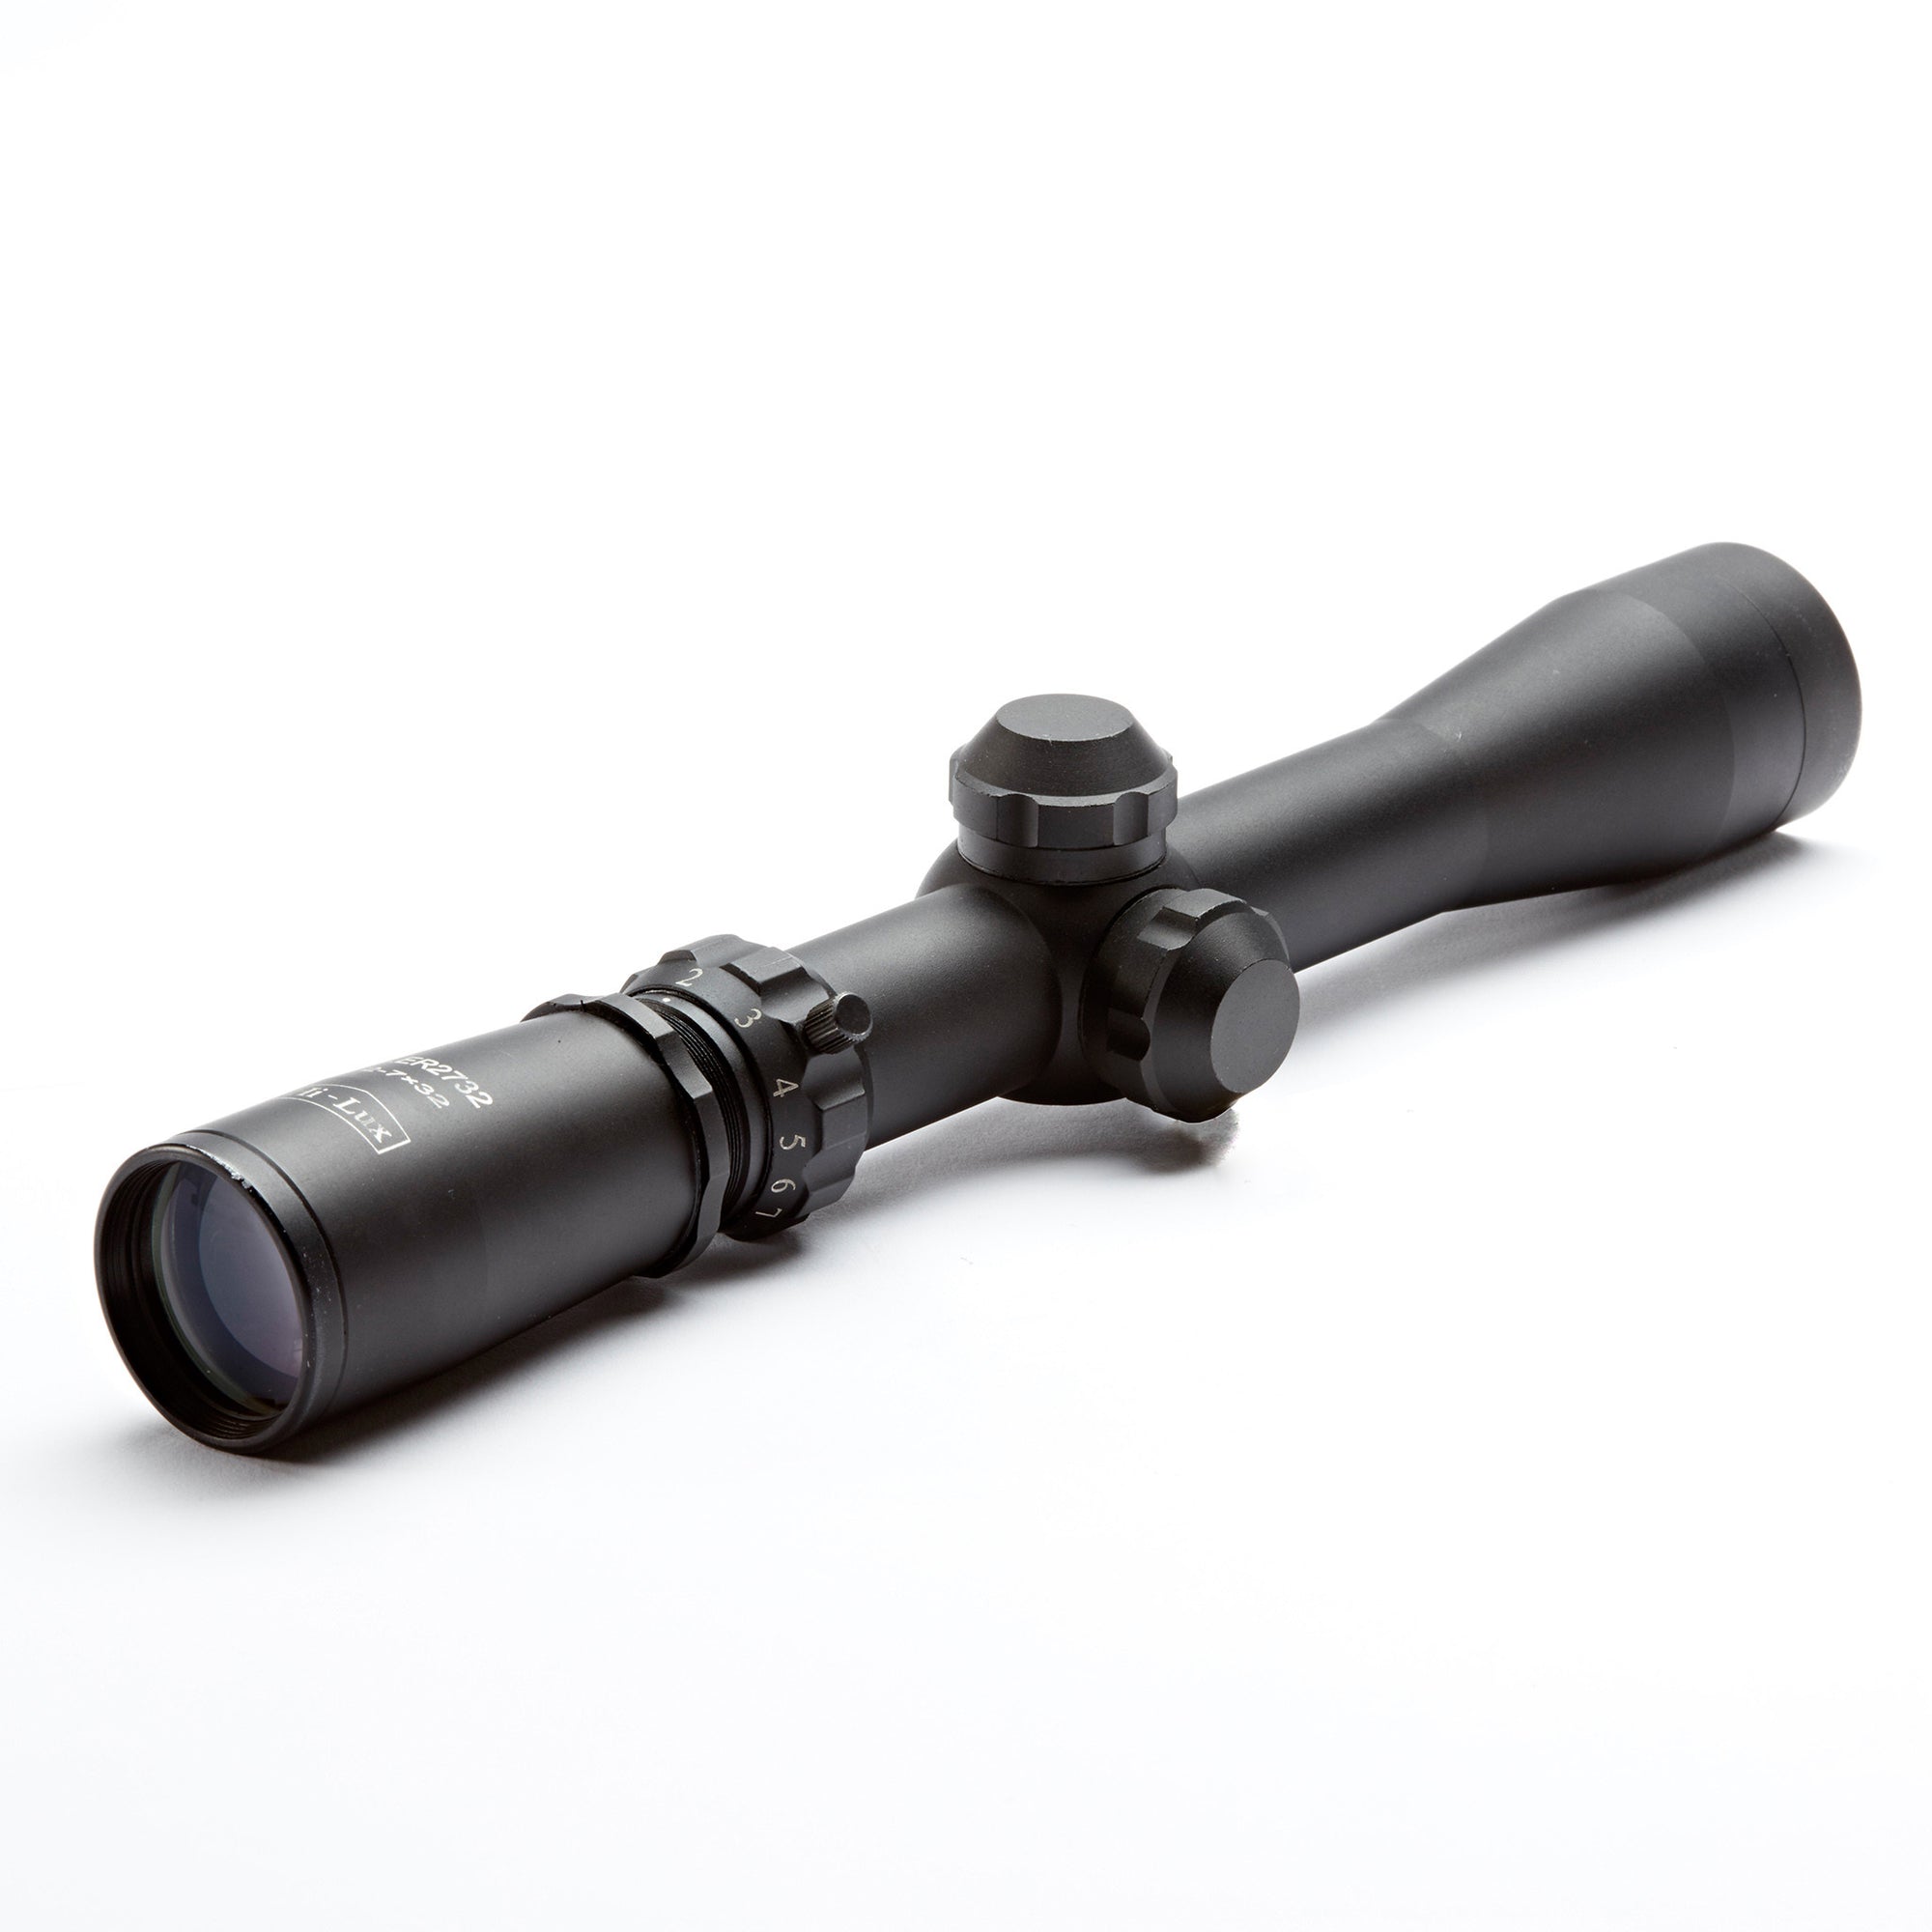 The Hi-Lux Optics LER Scout Scope - Specifically Designed for Today's